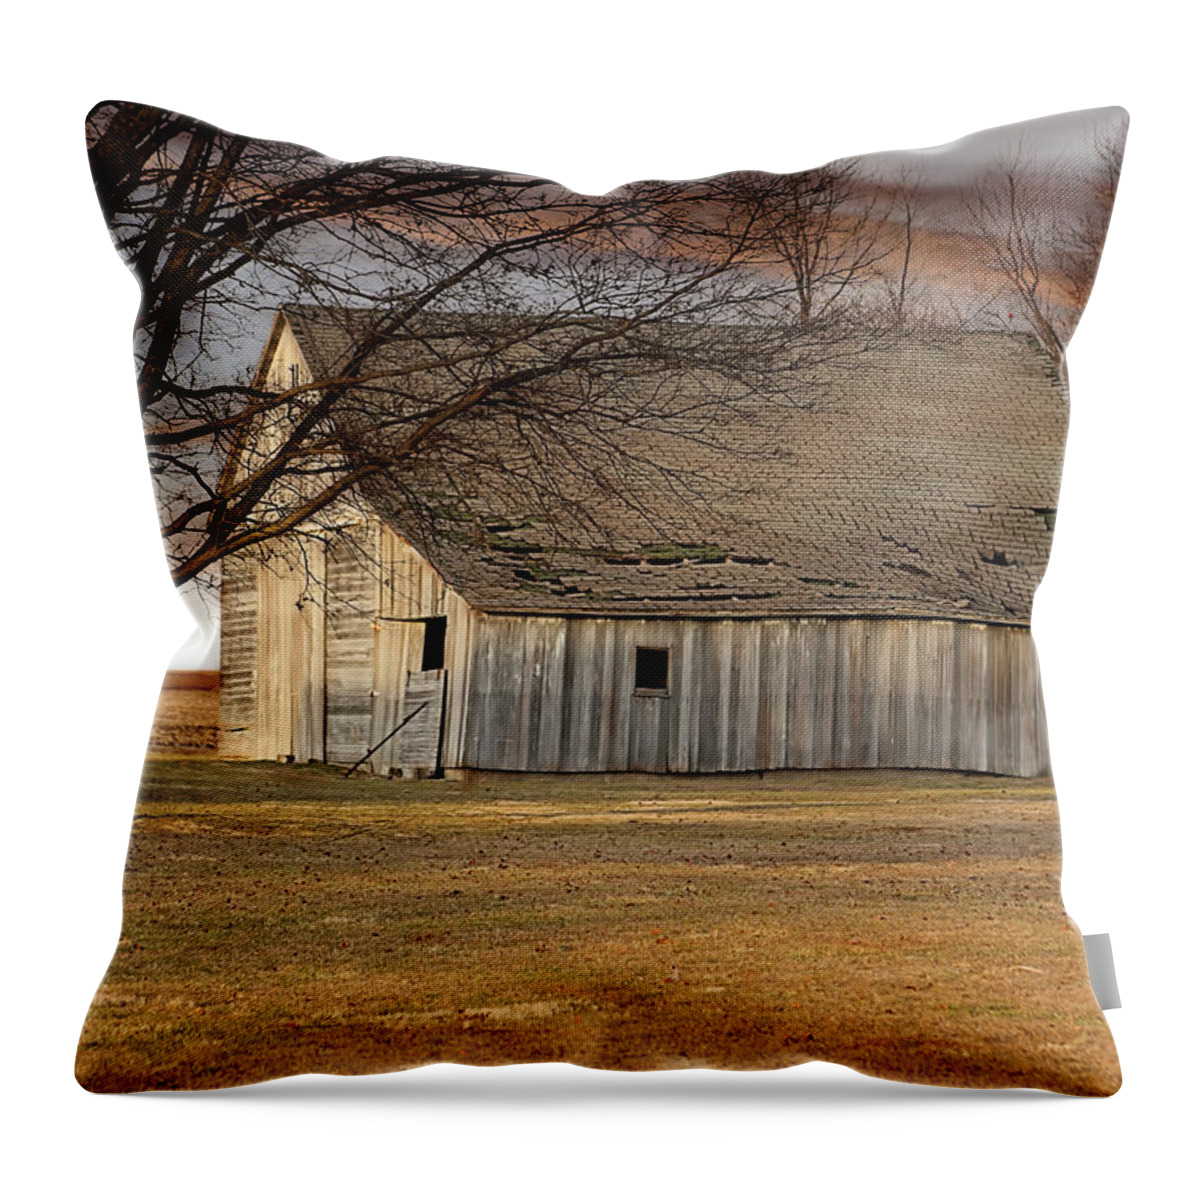 Farm Throw Pillow featuring the photograph Bent But Unbroken by Theresa Campbell